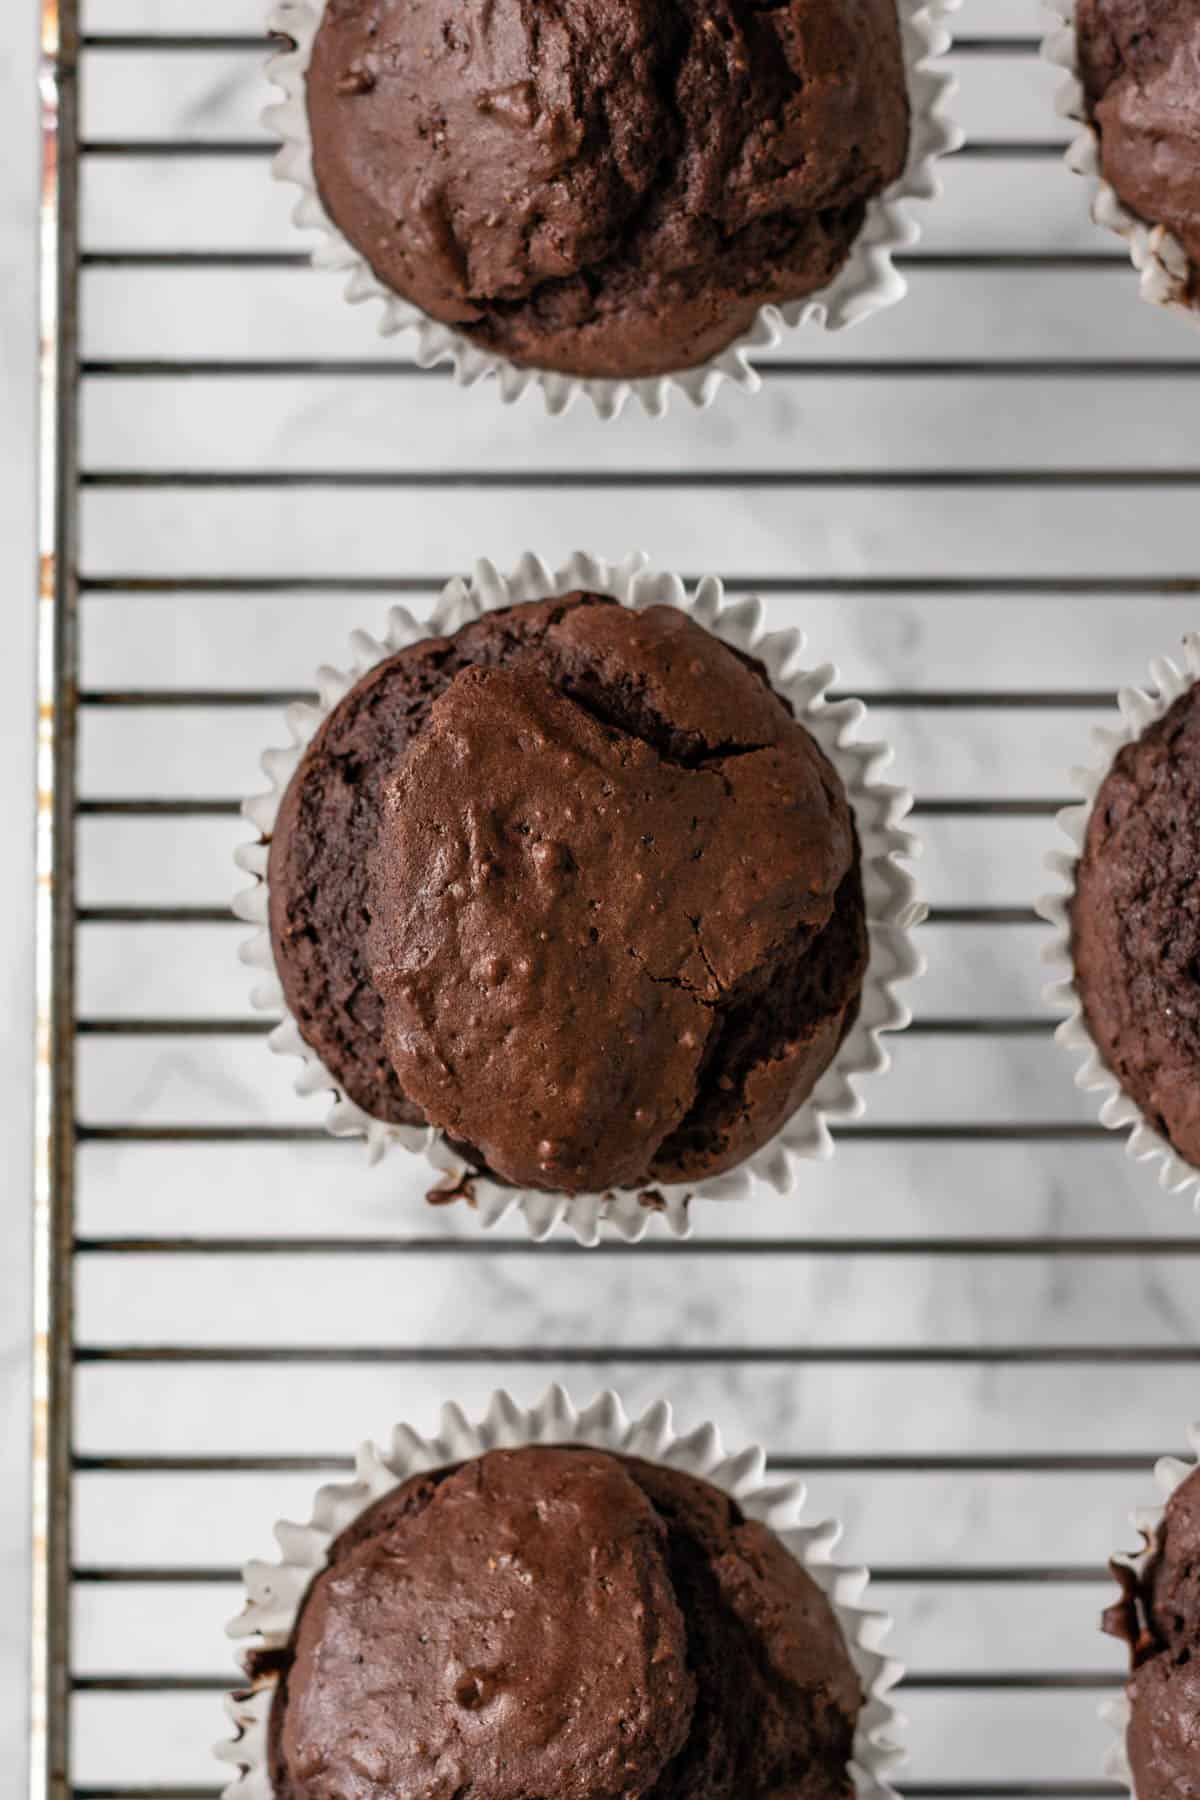 baked chocolate cupcakes fresh from the oven